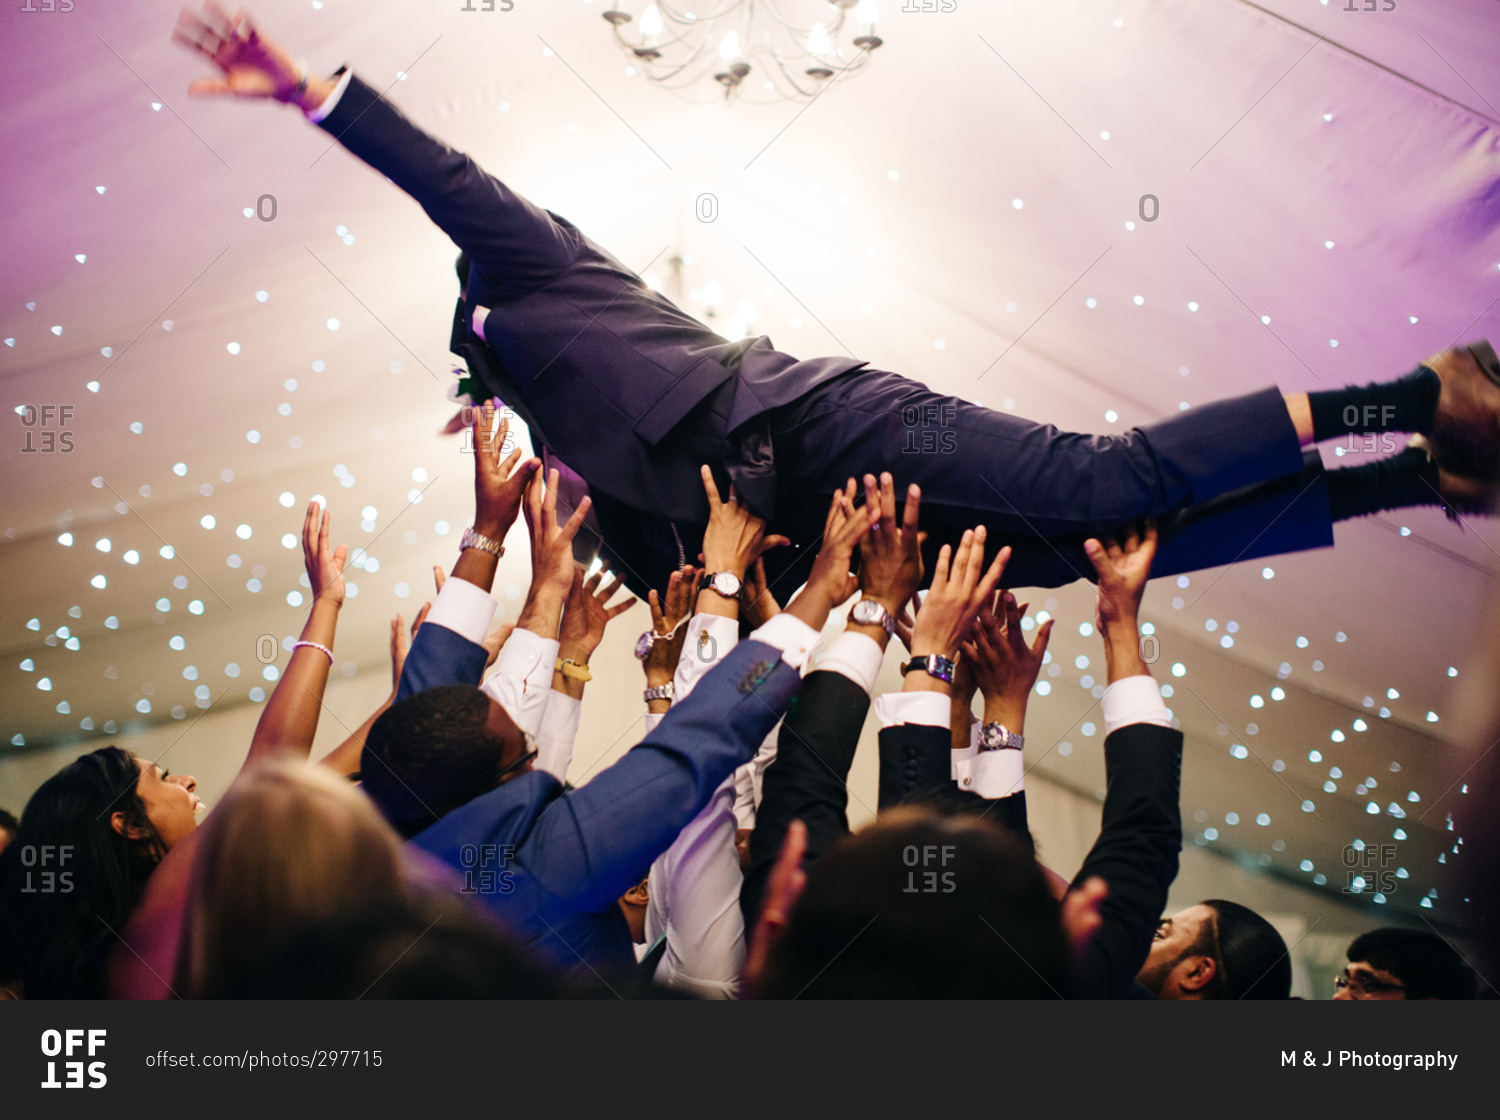 Wedding guests catch groom as he dives into crowd